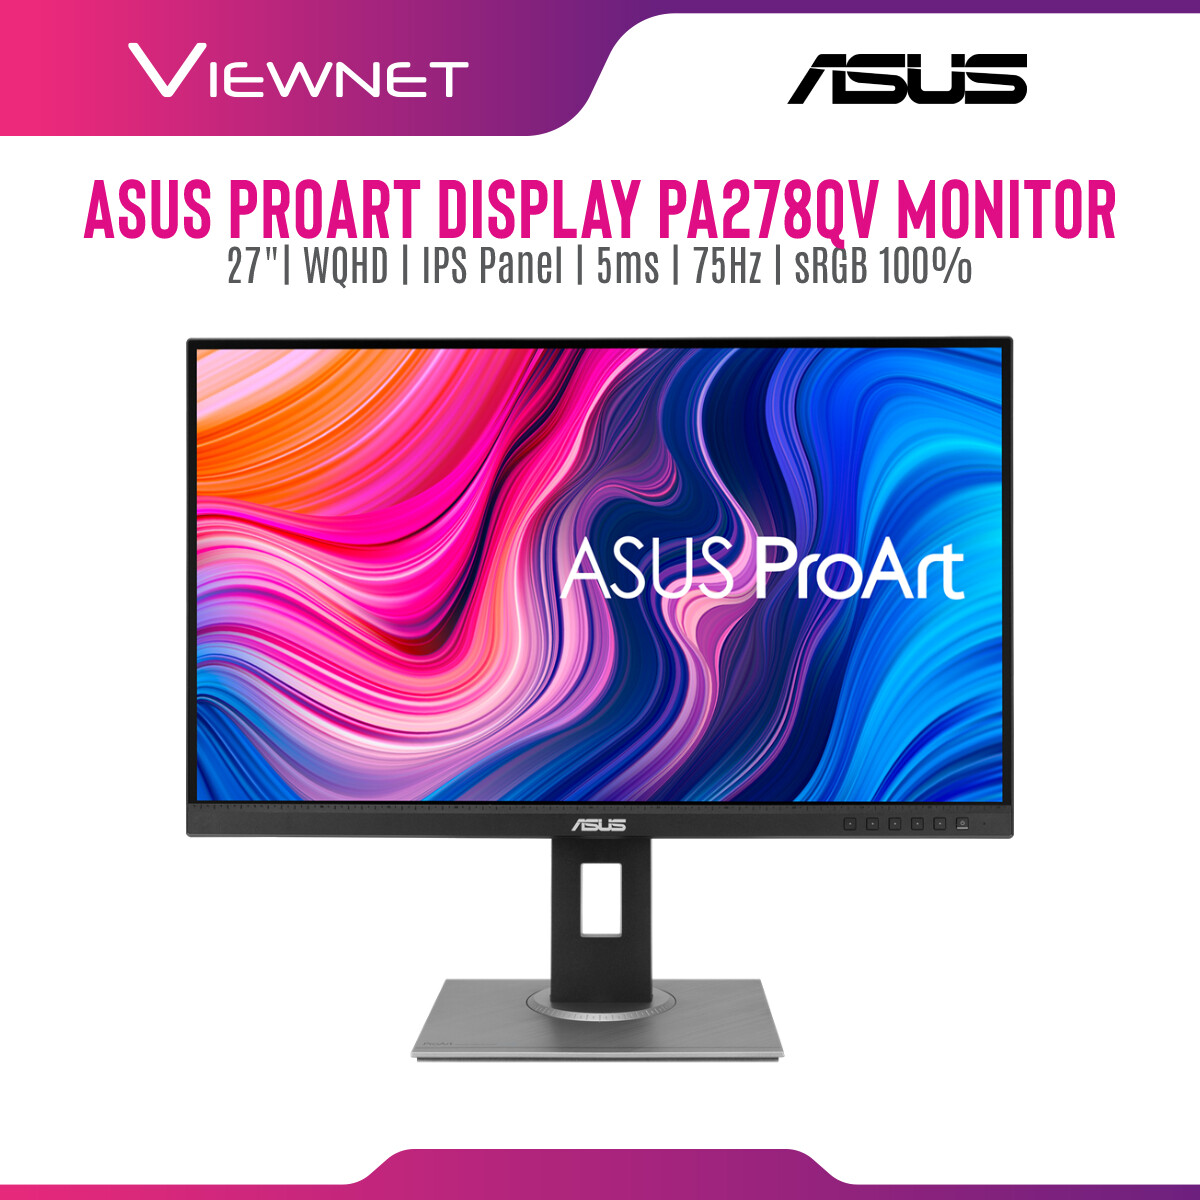 MONITOR ASUS LED PROART FLAT 27" PA278QV Professional Monitor (IPS, 5ms(GTG), 75Hz, Color Accuracy ΔE < 2, Calman Verified)